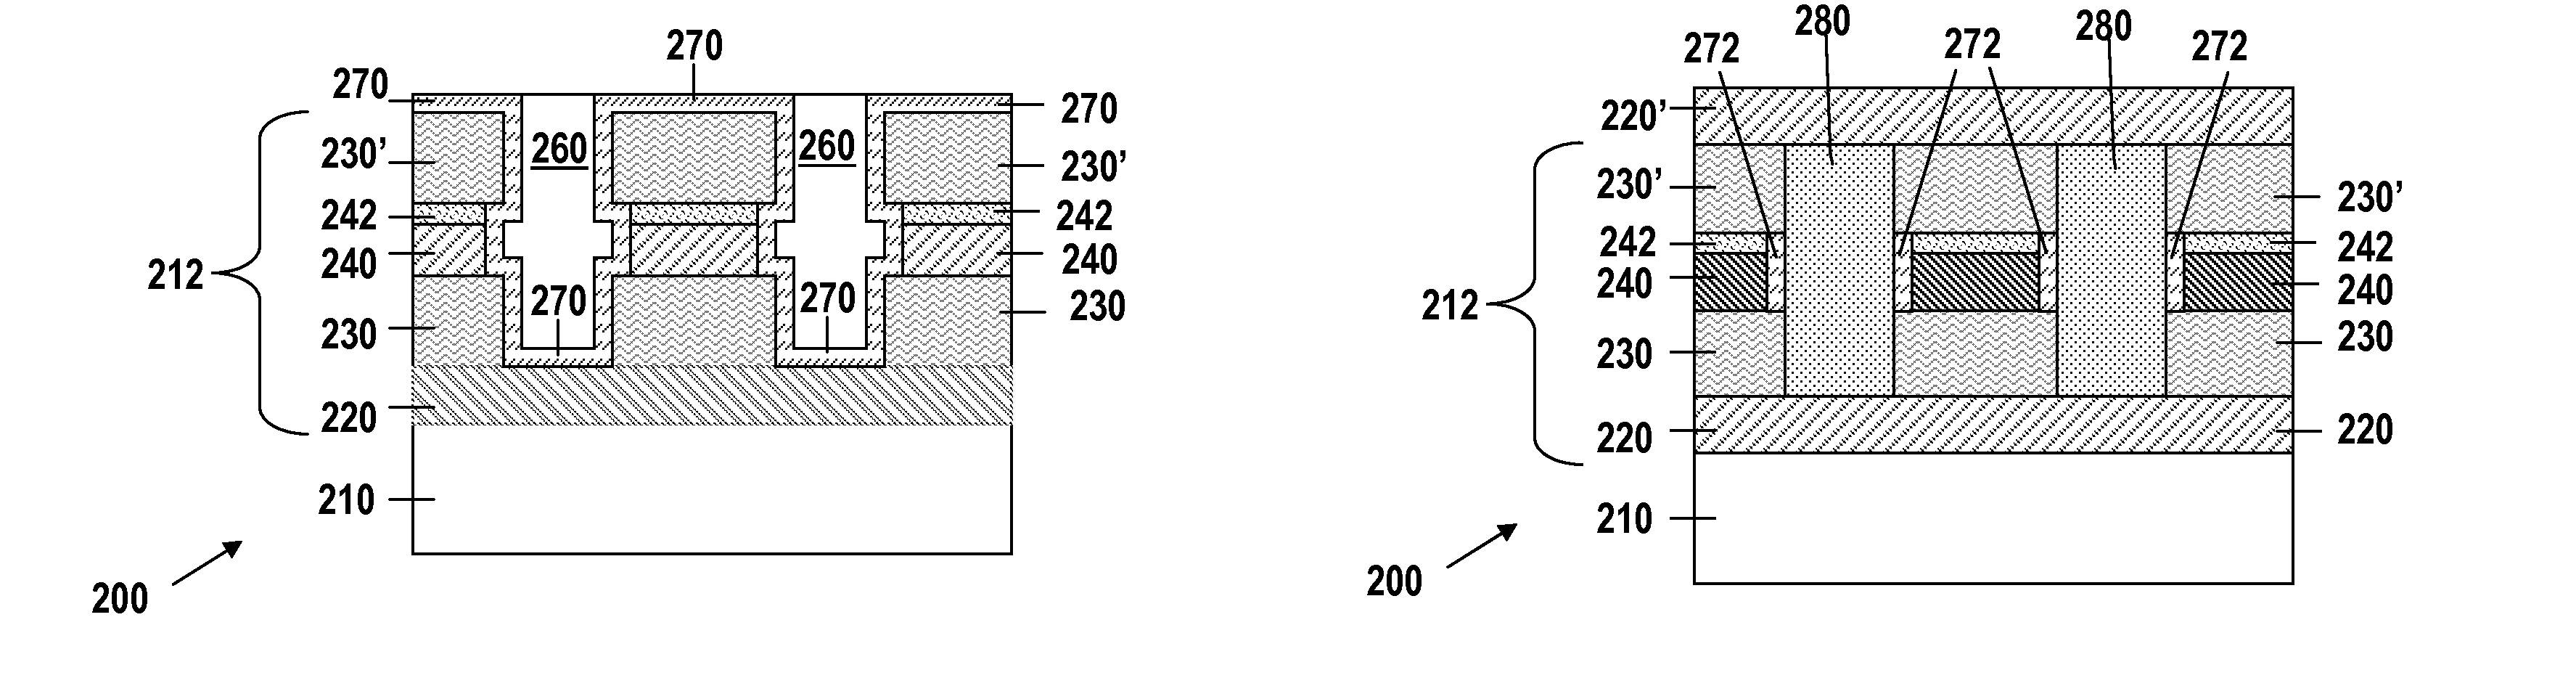 Methods of manufacture of vertical nanowire FET devices